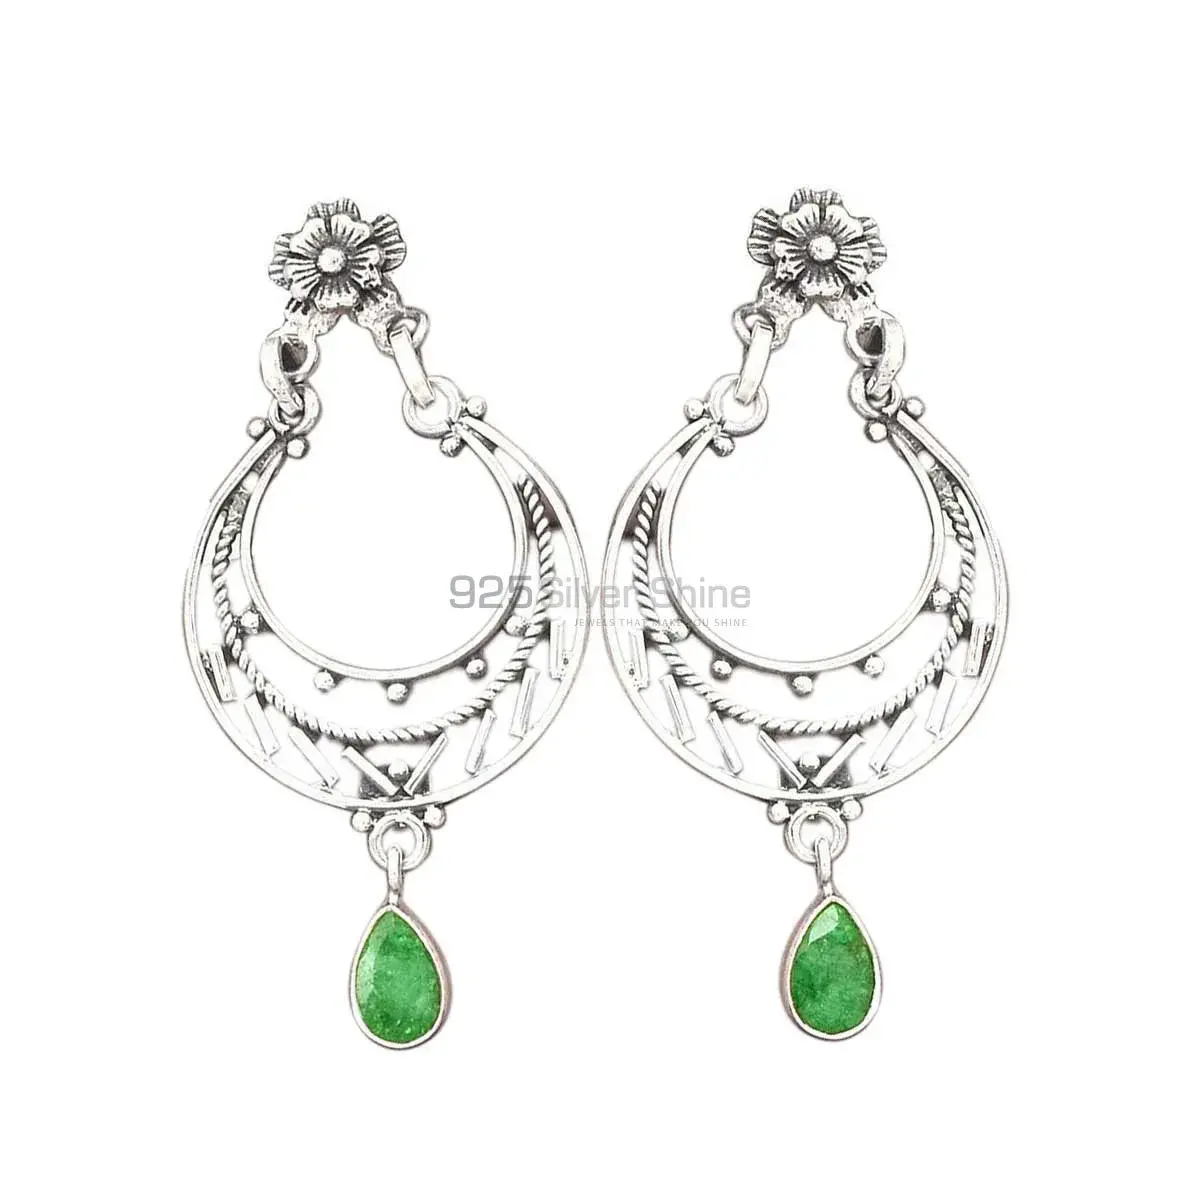 Unique 925 Sterling Silver Handmade Earrings Suppliers In Dyed Emerald Gemstone Jewelry 925SE3113